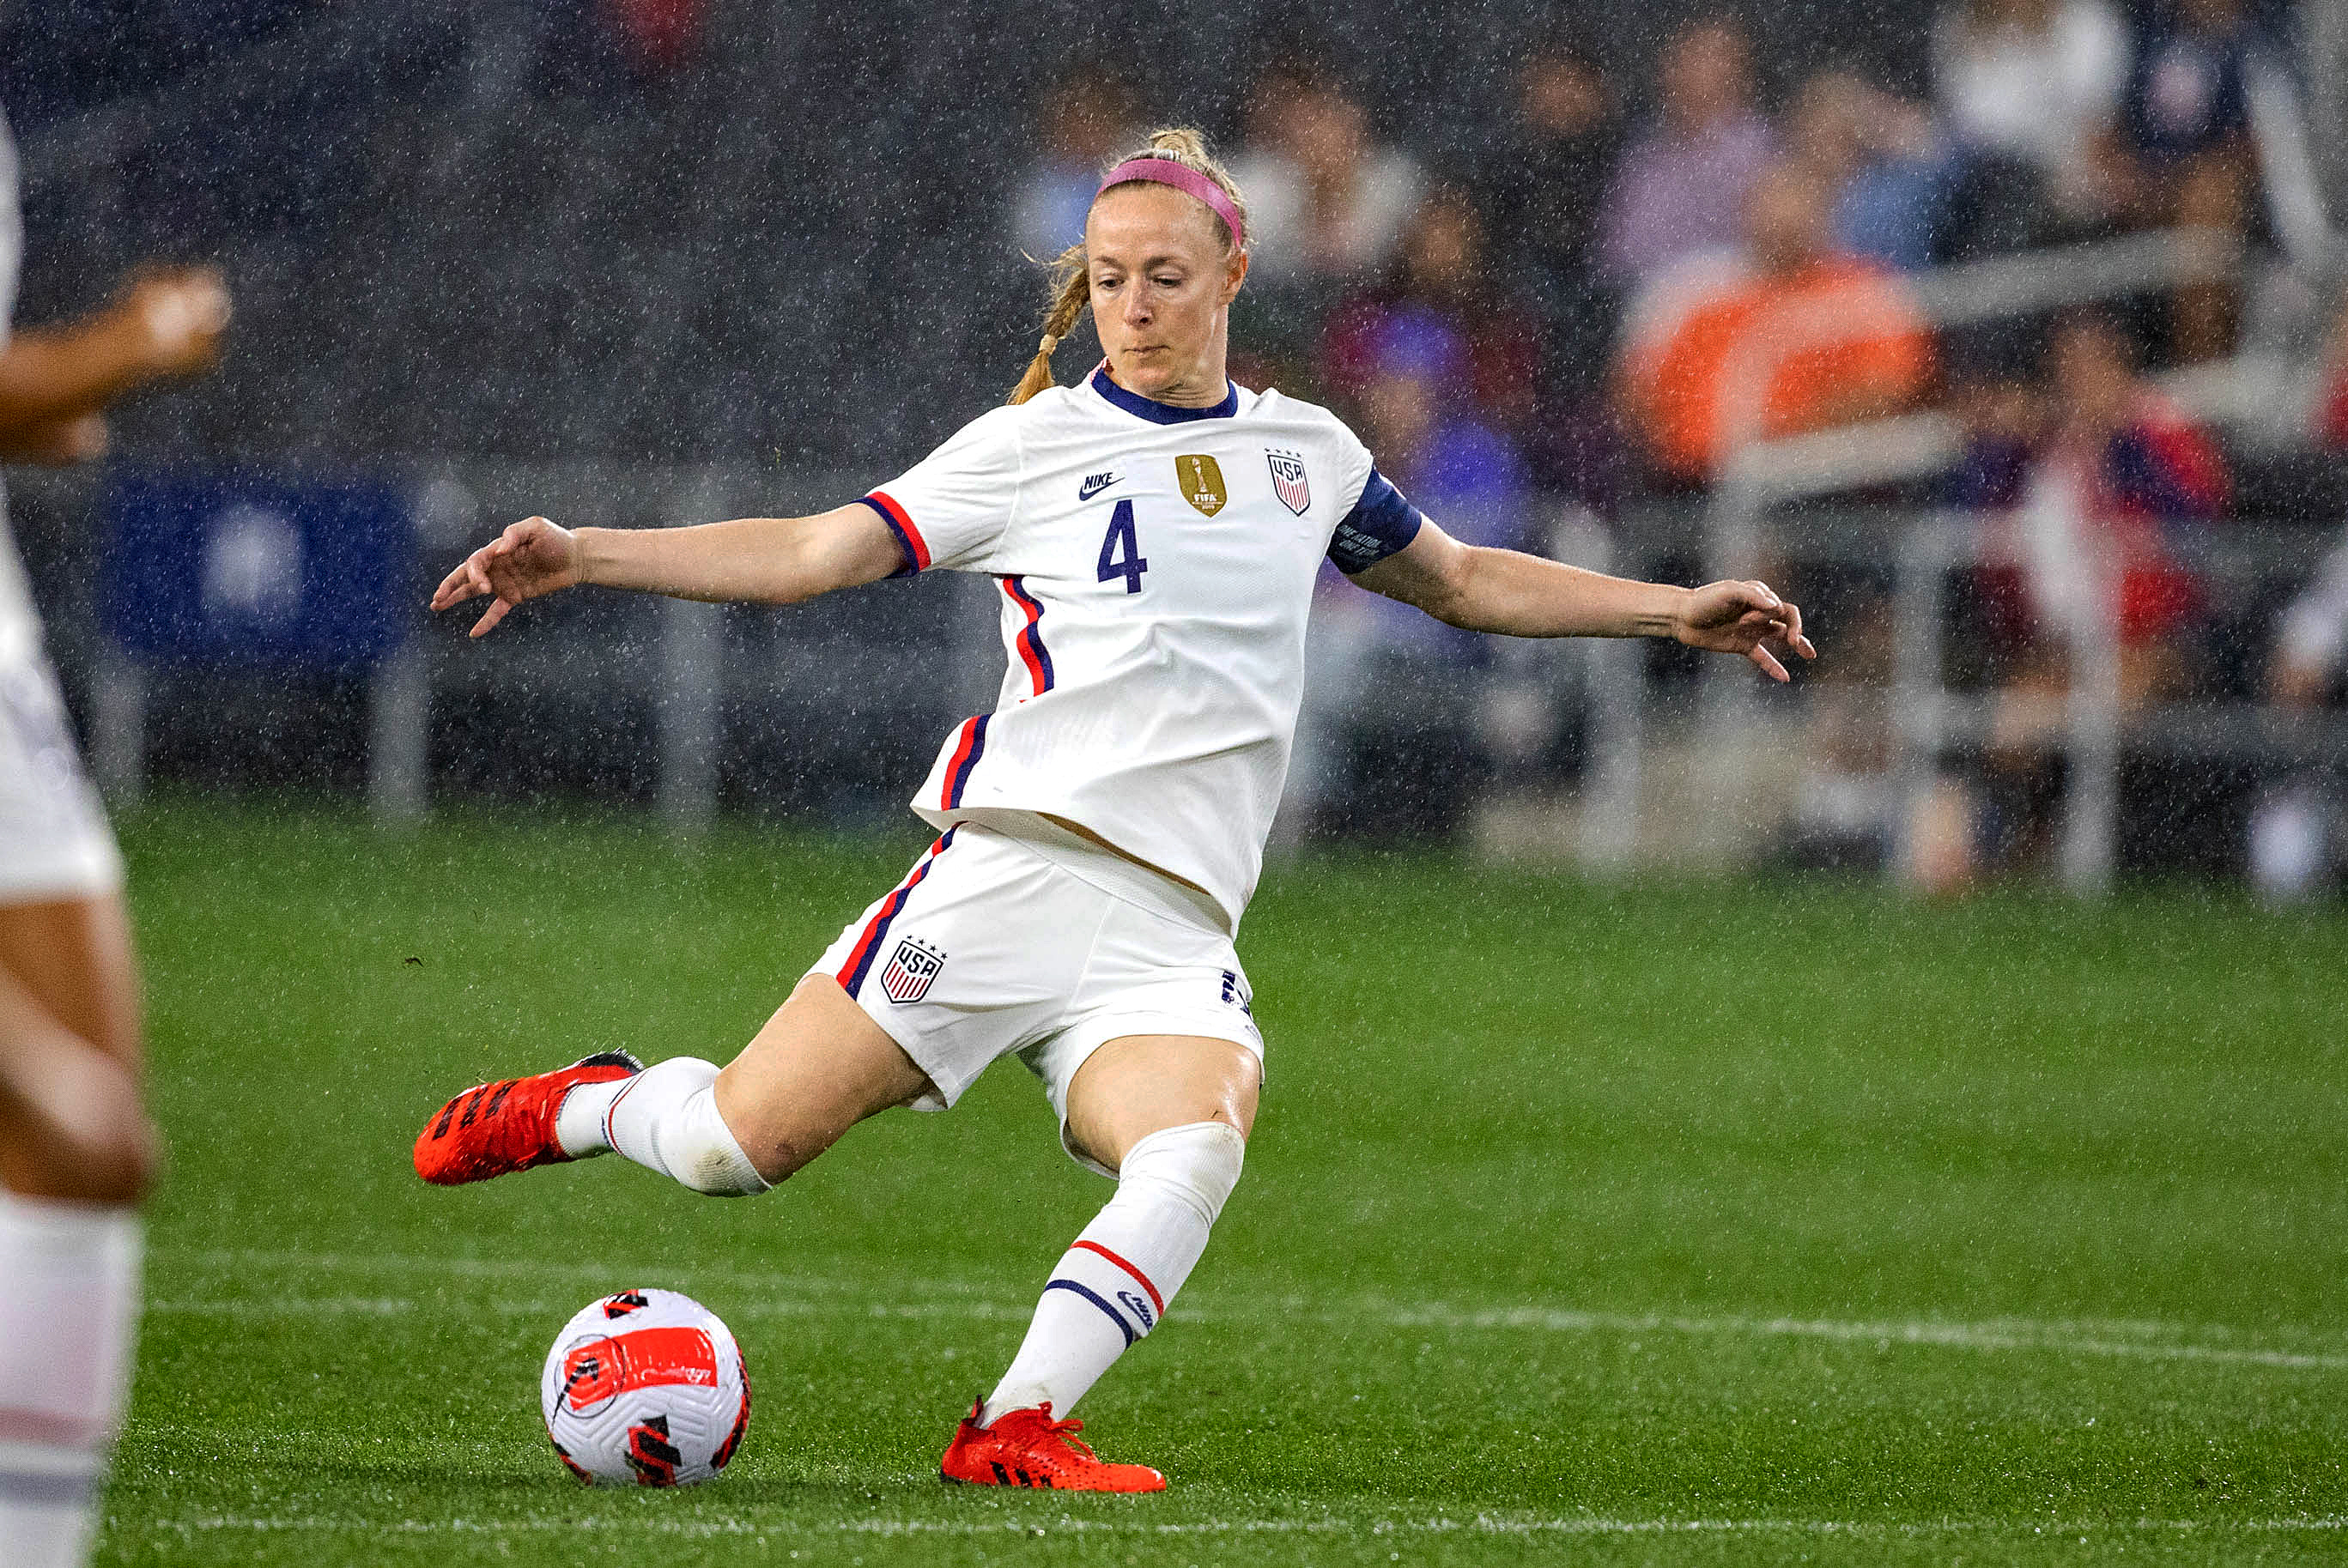 Do women soccer players have more concussions? This world cup and beyond,  here's how to keep our players safe